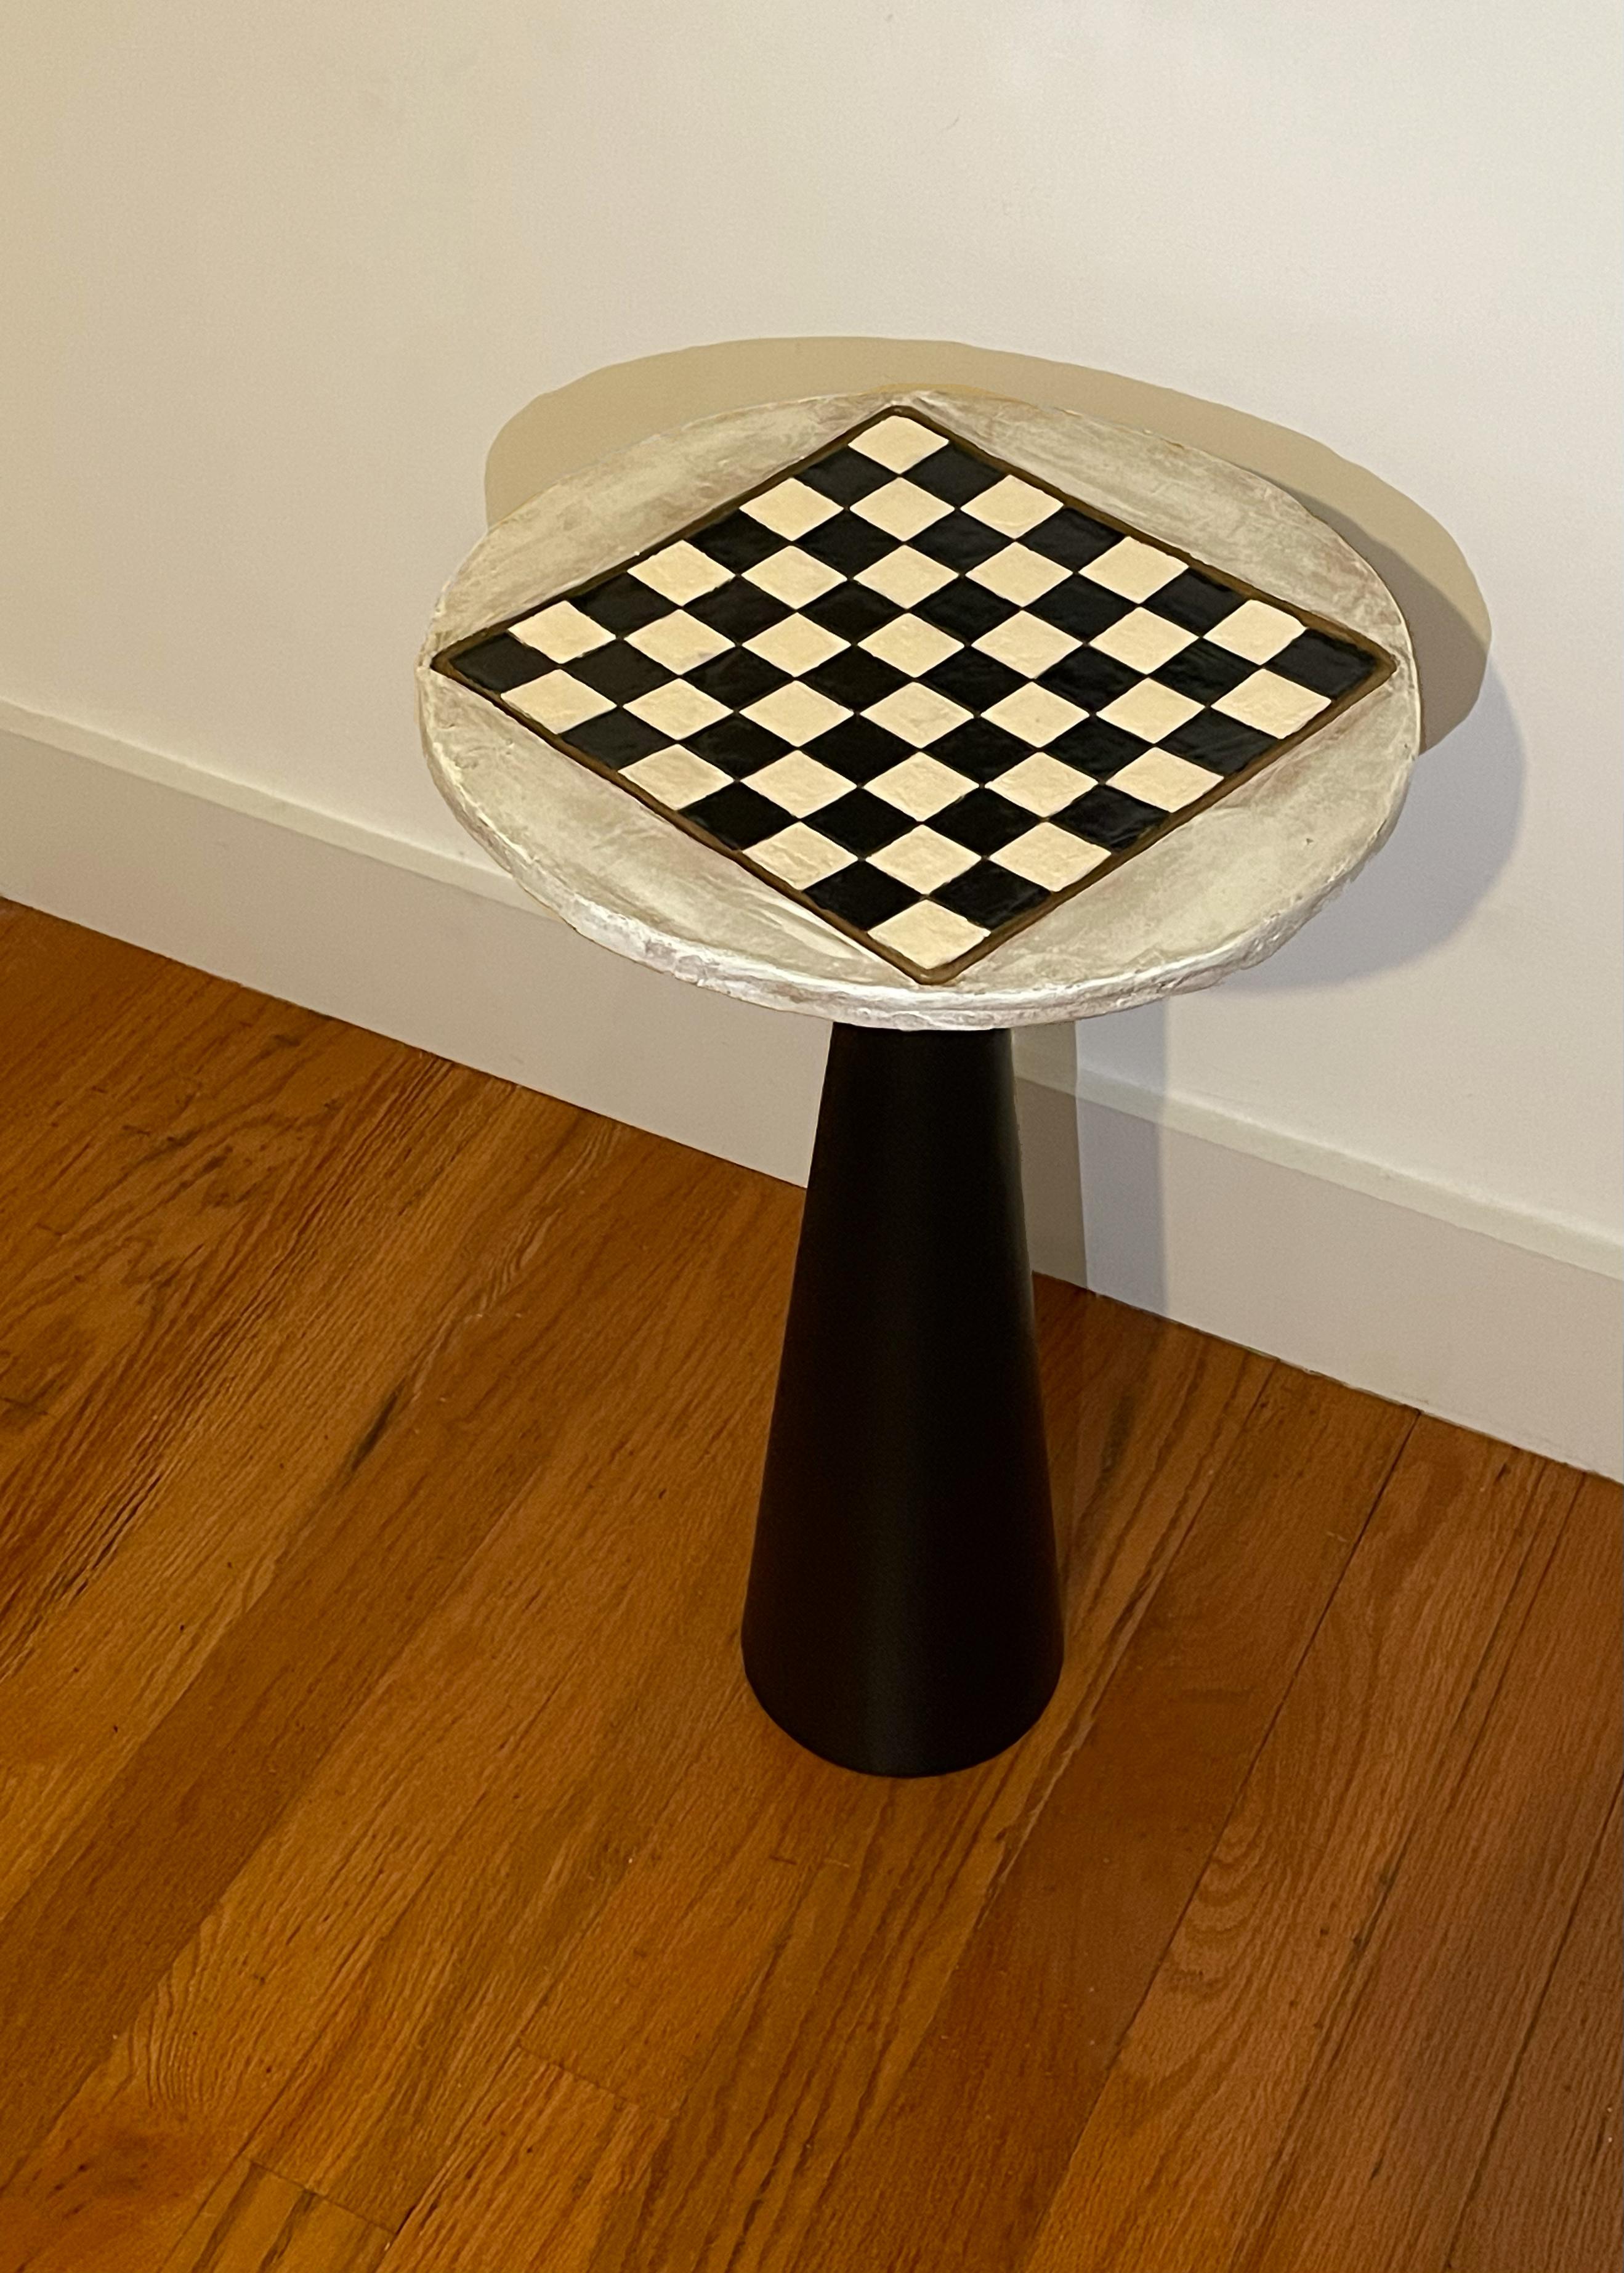 American Ceramic and Metal Chess Table